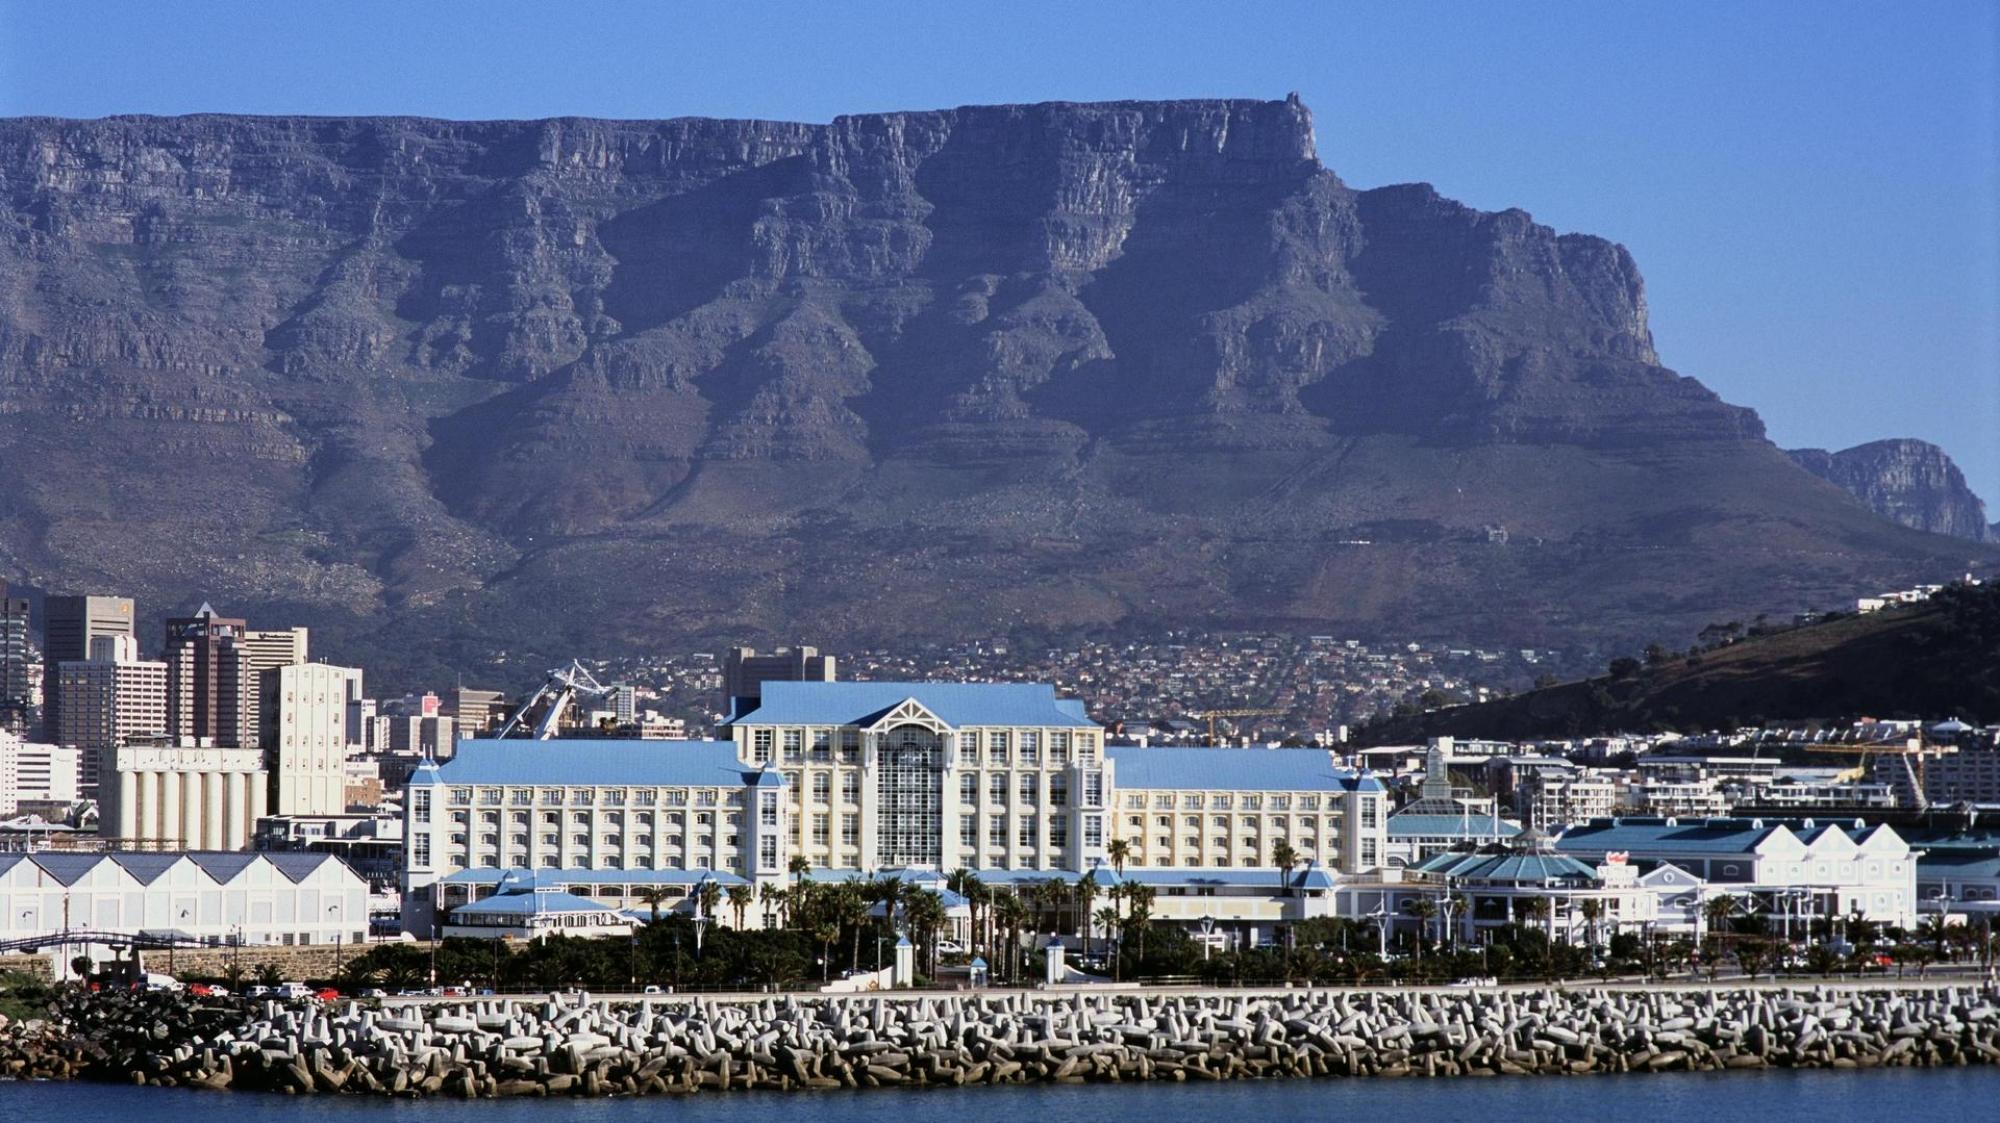 The Table Bay Hotel's scenic view of the Table Mountain in sensational South Africa.